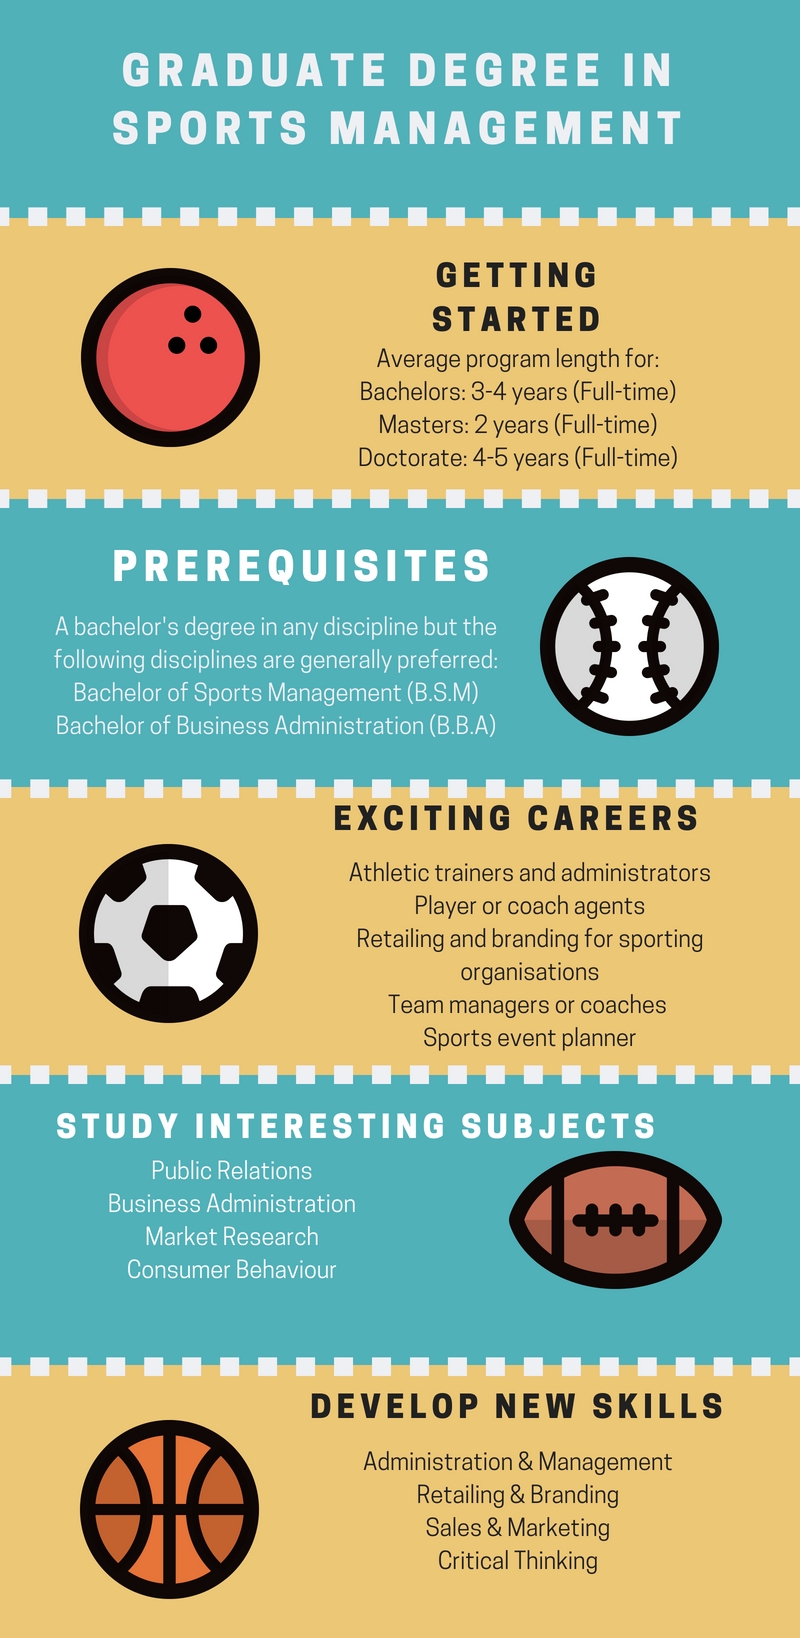 Graduate degree in sports management